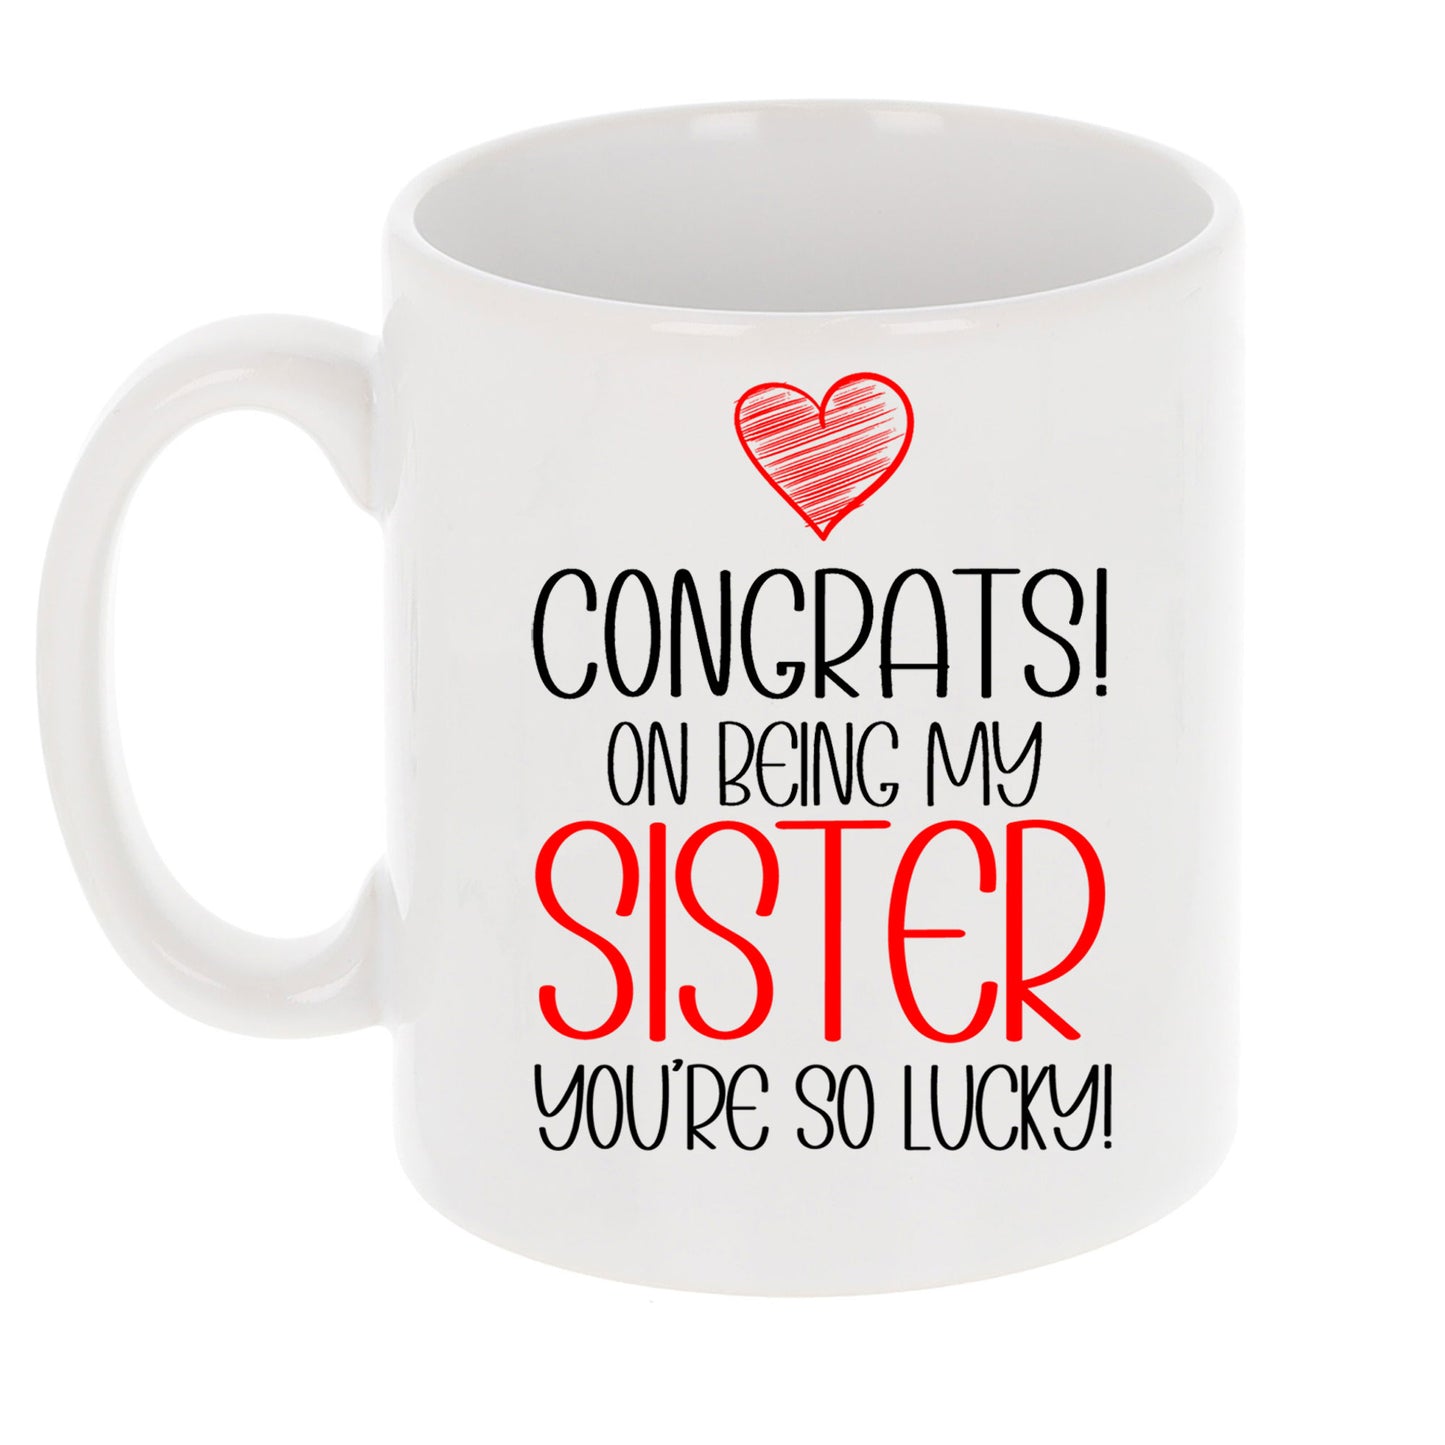 Congrats On Being My Sister Mug and/or Coaster Gift  - Always Looking Good - So Lucky Mug On Its Own  